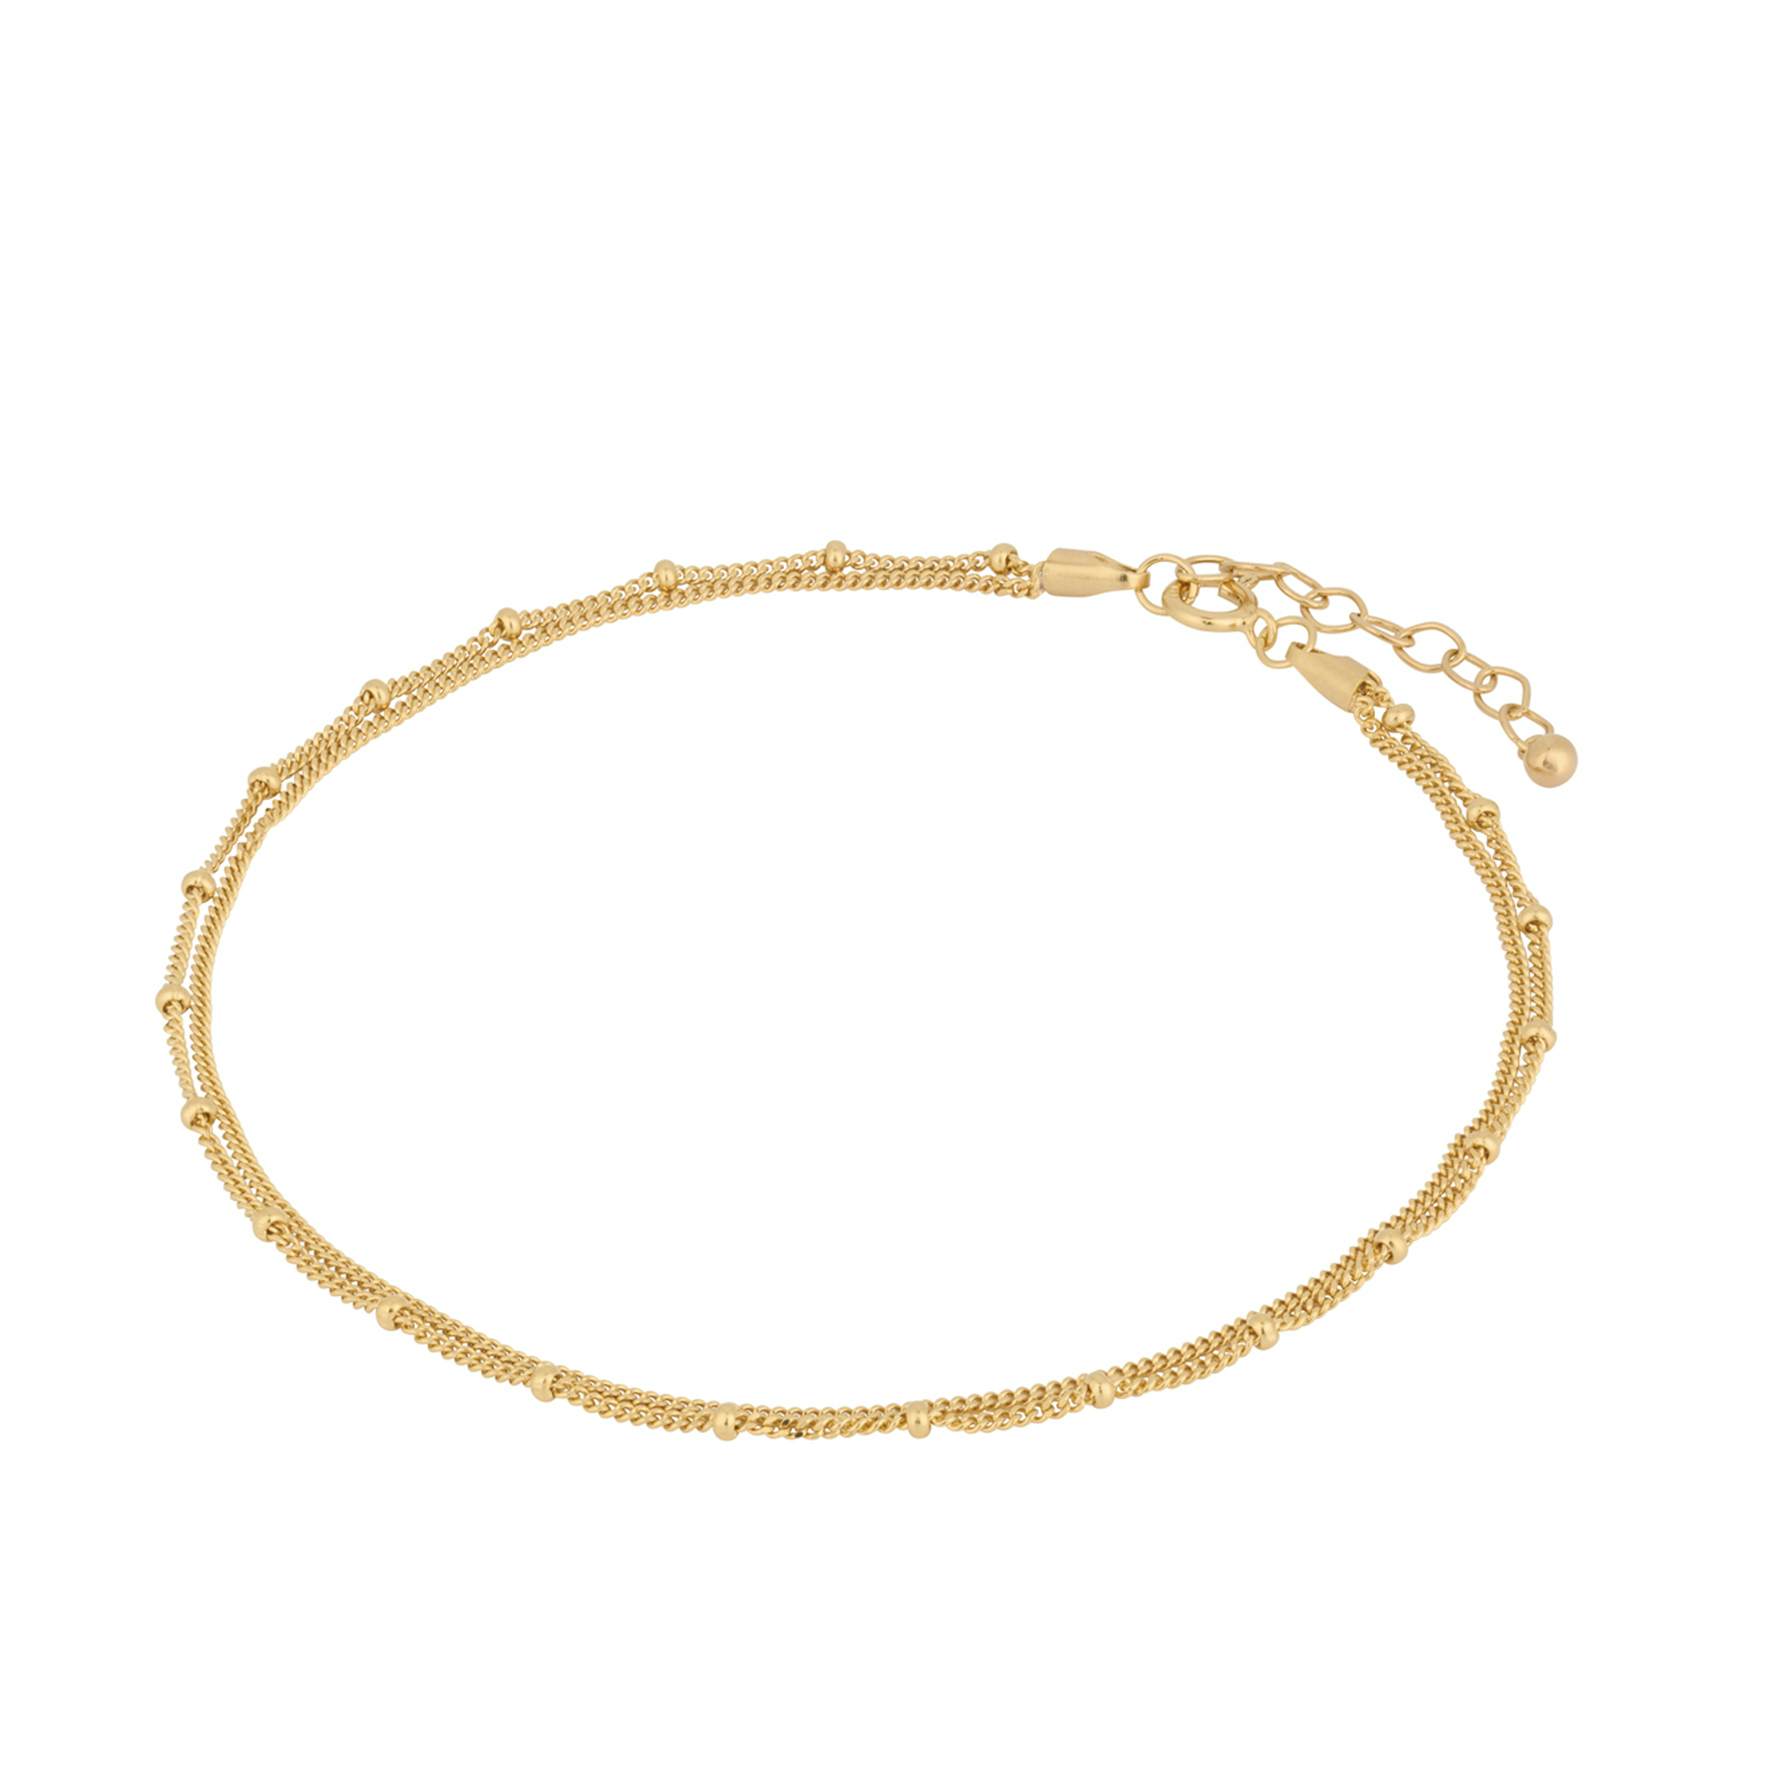 Galaxy Anklet from Pernille Corydon in Goldplated-Silver Sterling 925